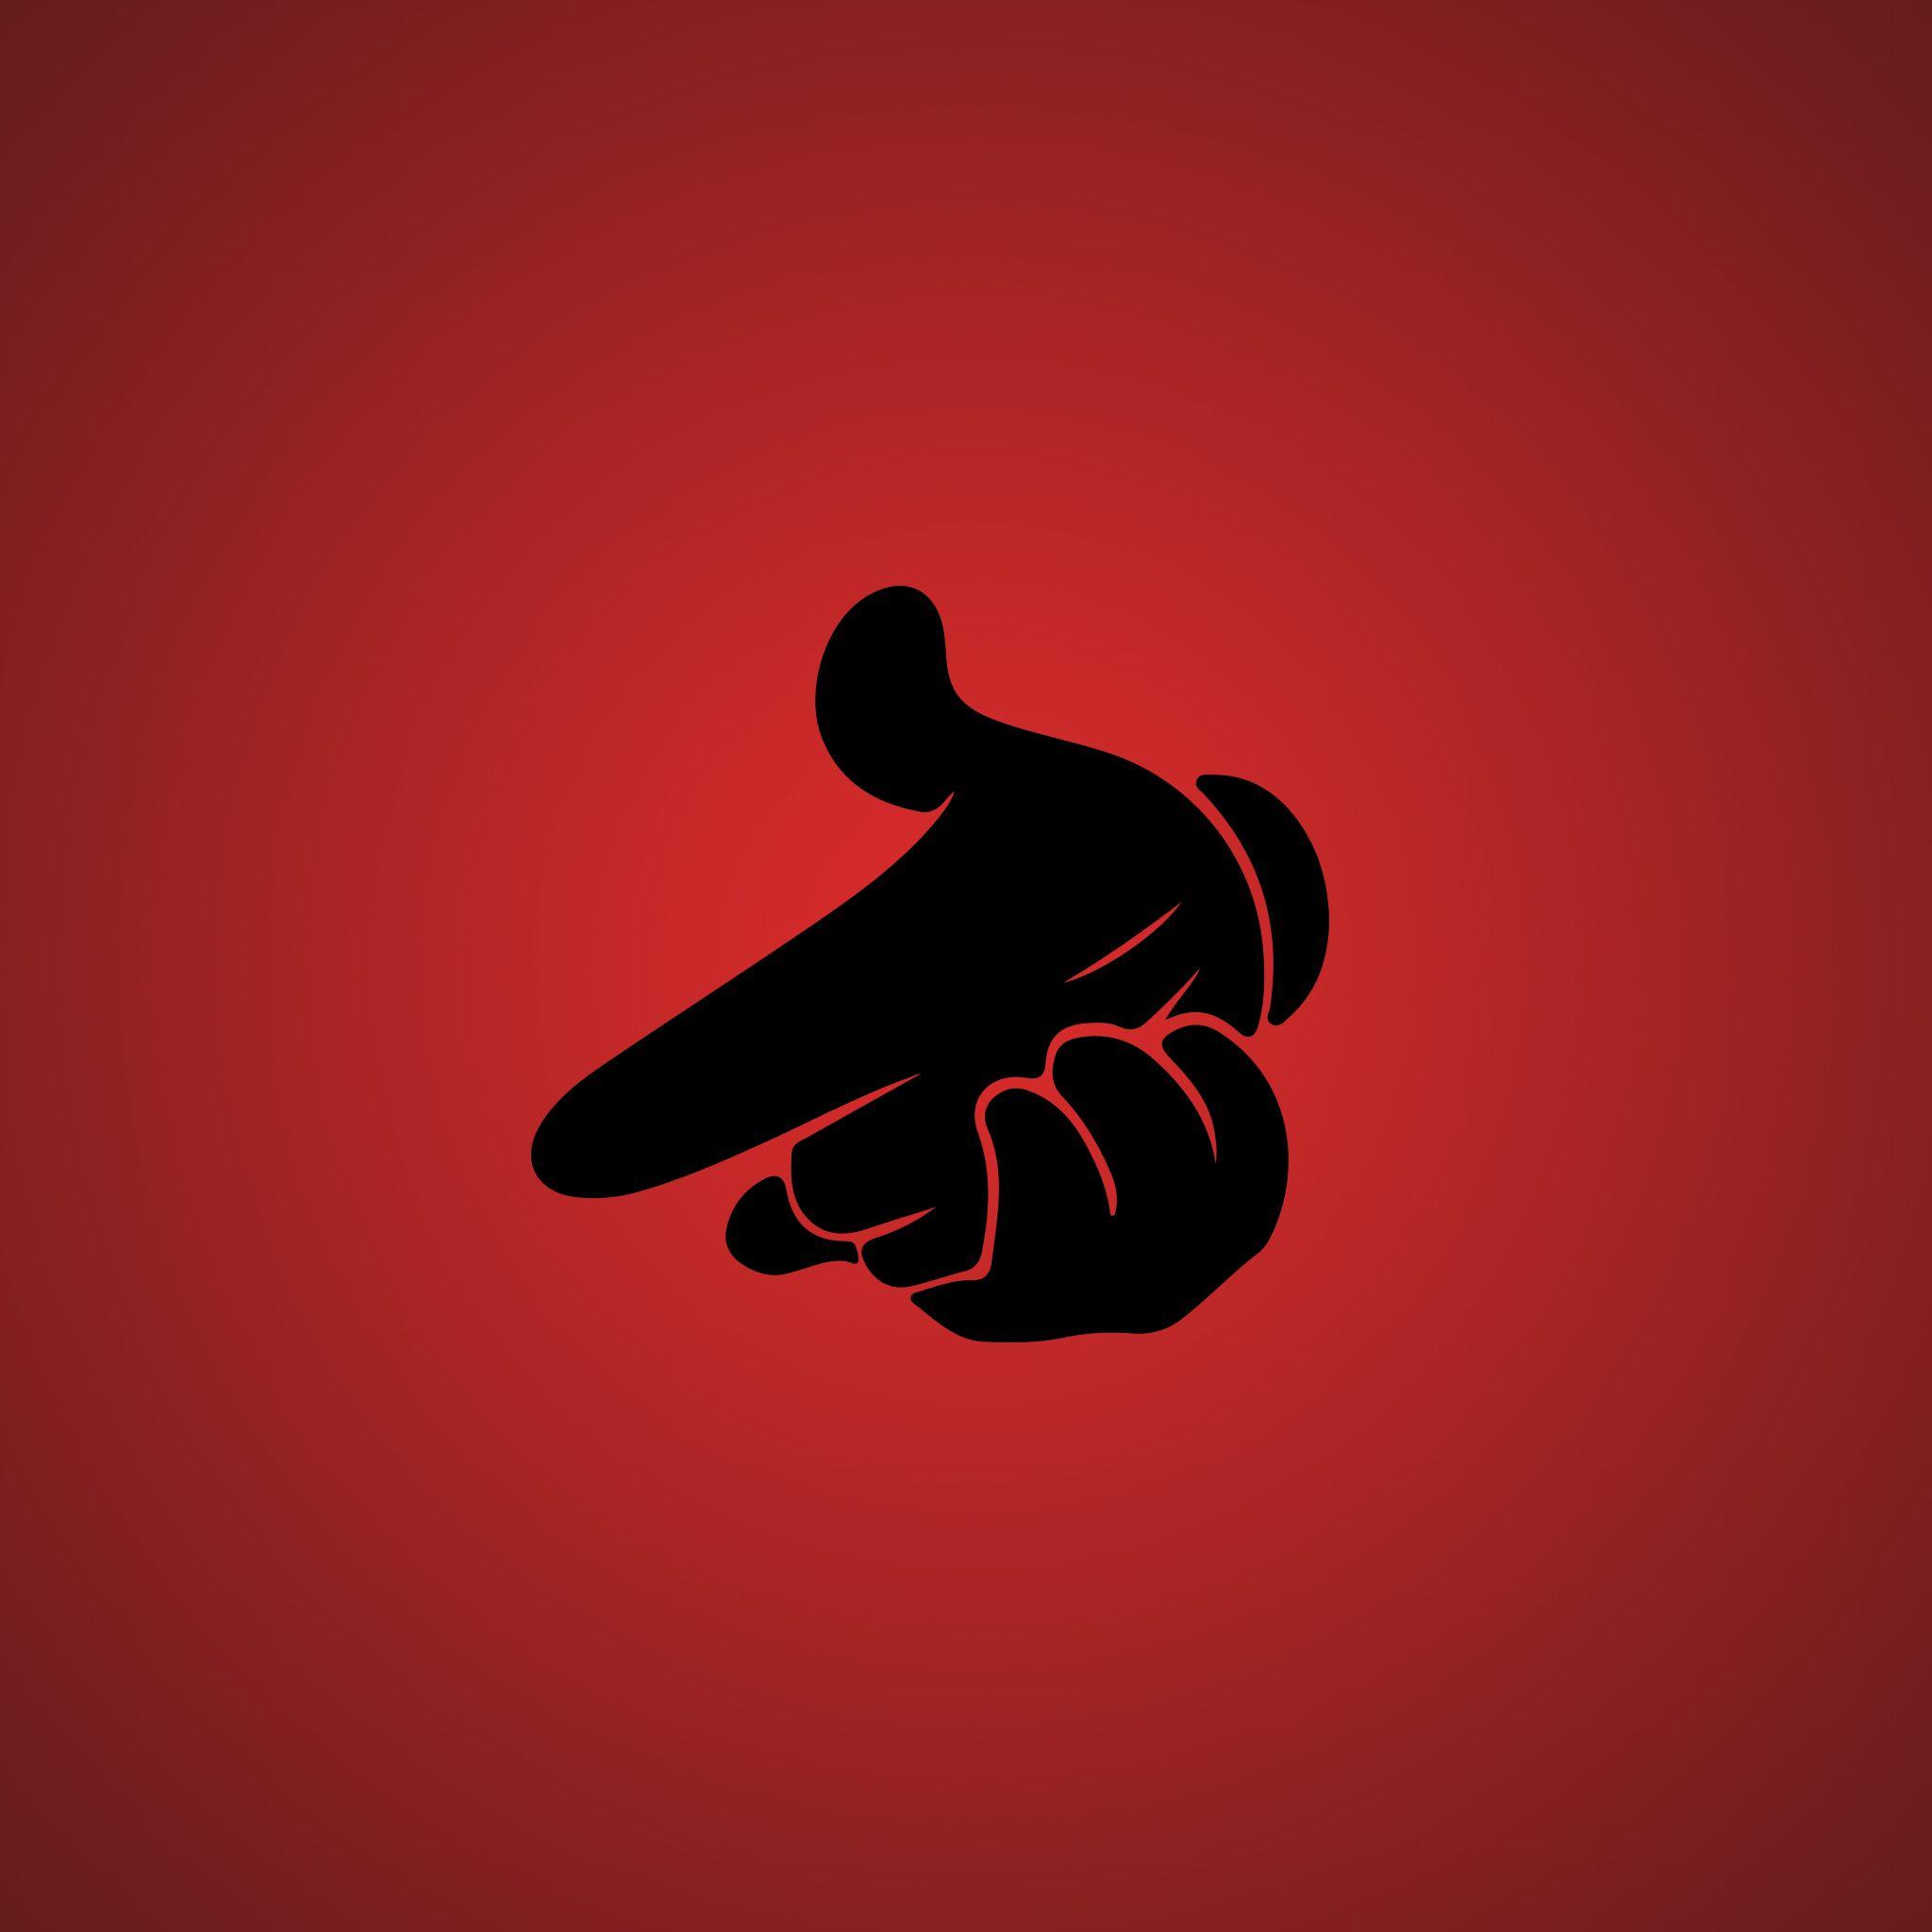 Red Crooks and Castles Logo - Crooks And Castles Wallpaper